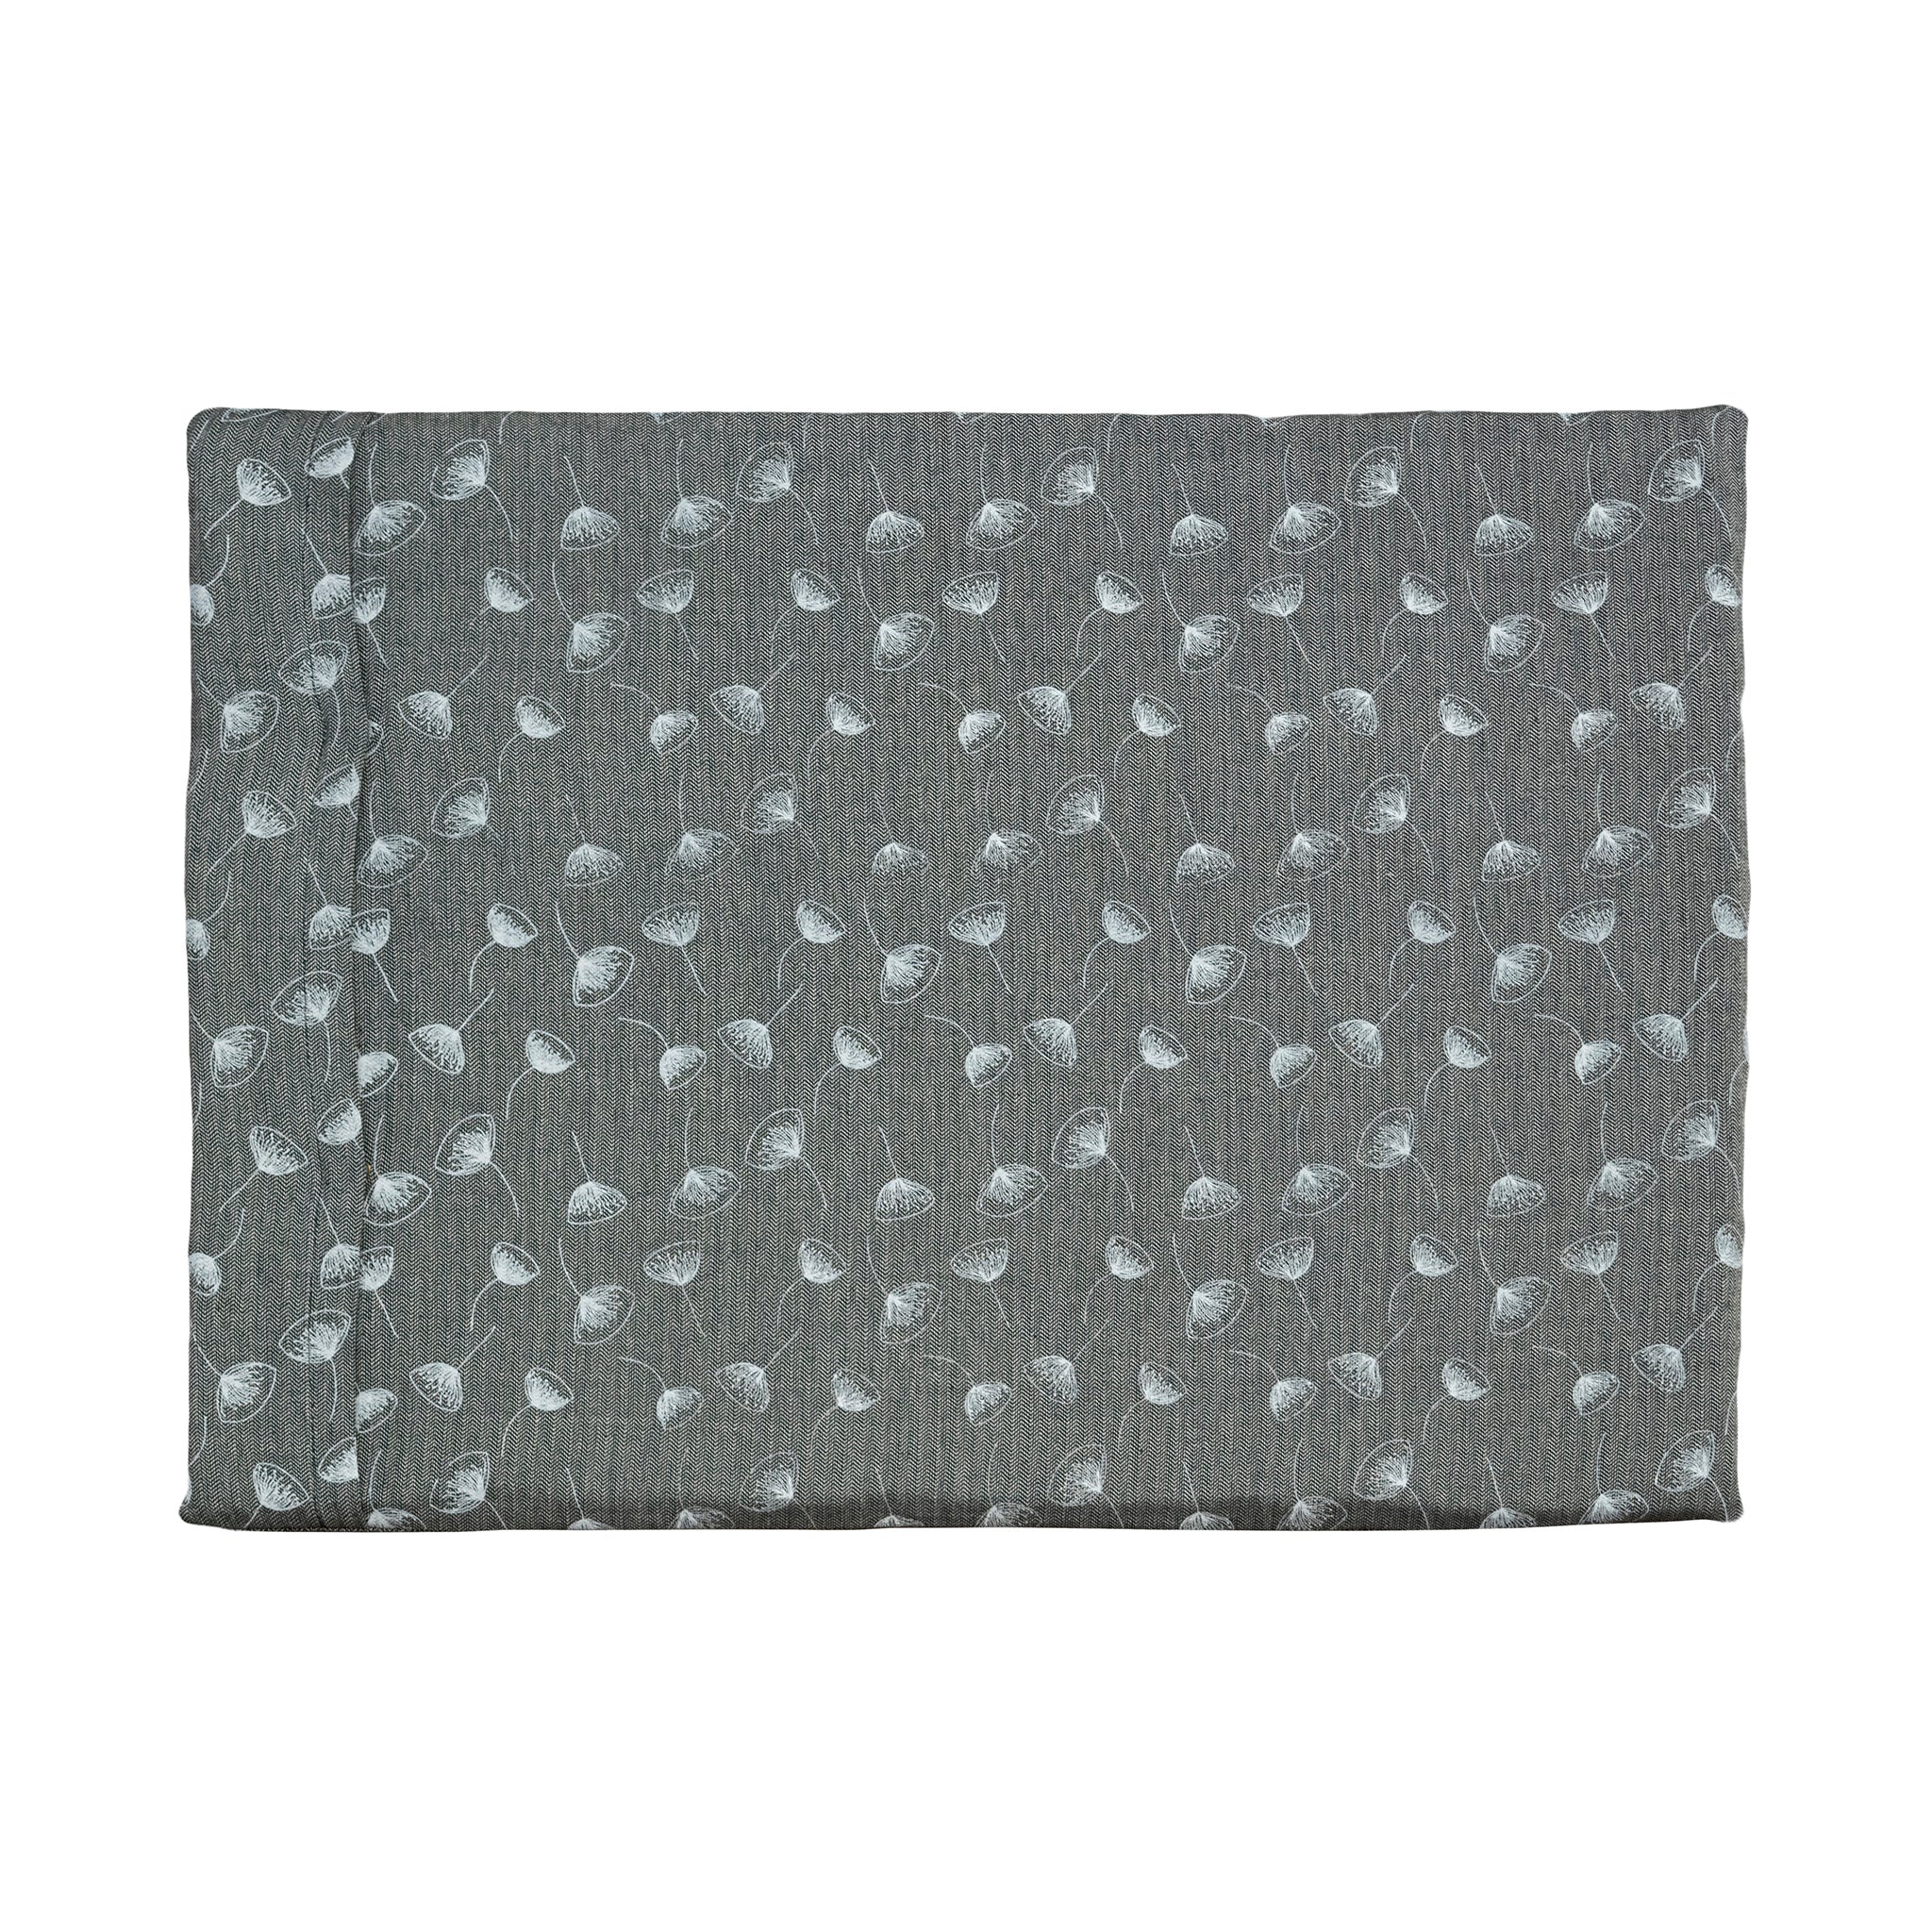 A Chimney Sheep Luxury felted wool dog bed. The bed is large and rectangular. This luxury wool dog bed is placed onto a white background. The organic cotton cover is patterned. The pattern is grey-blue with white flowers.